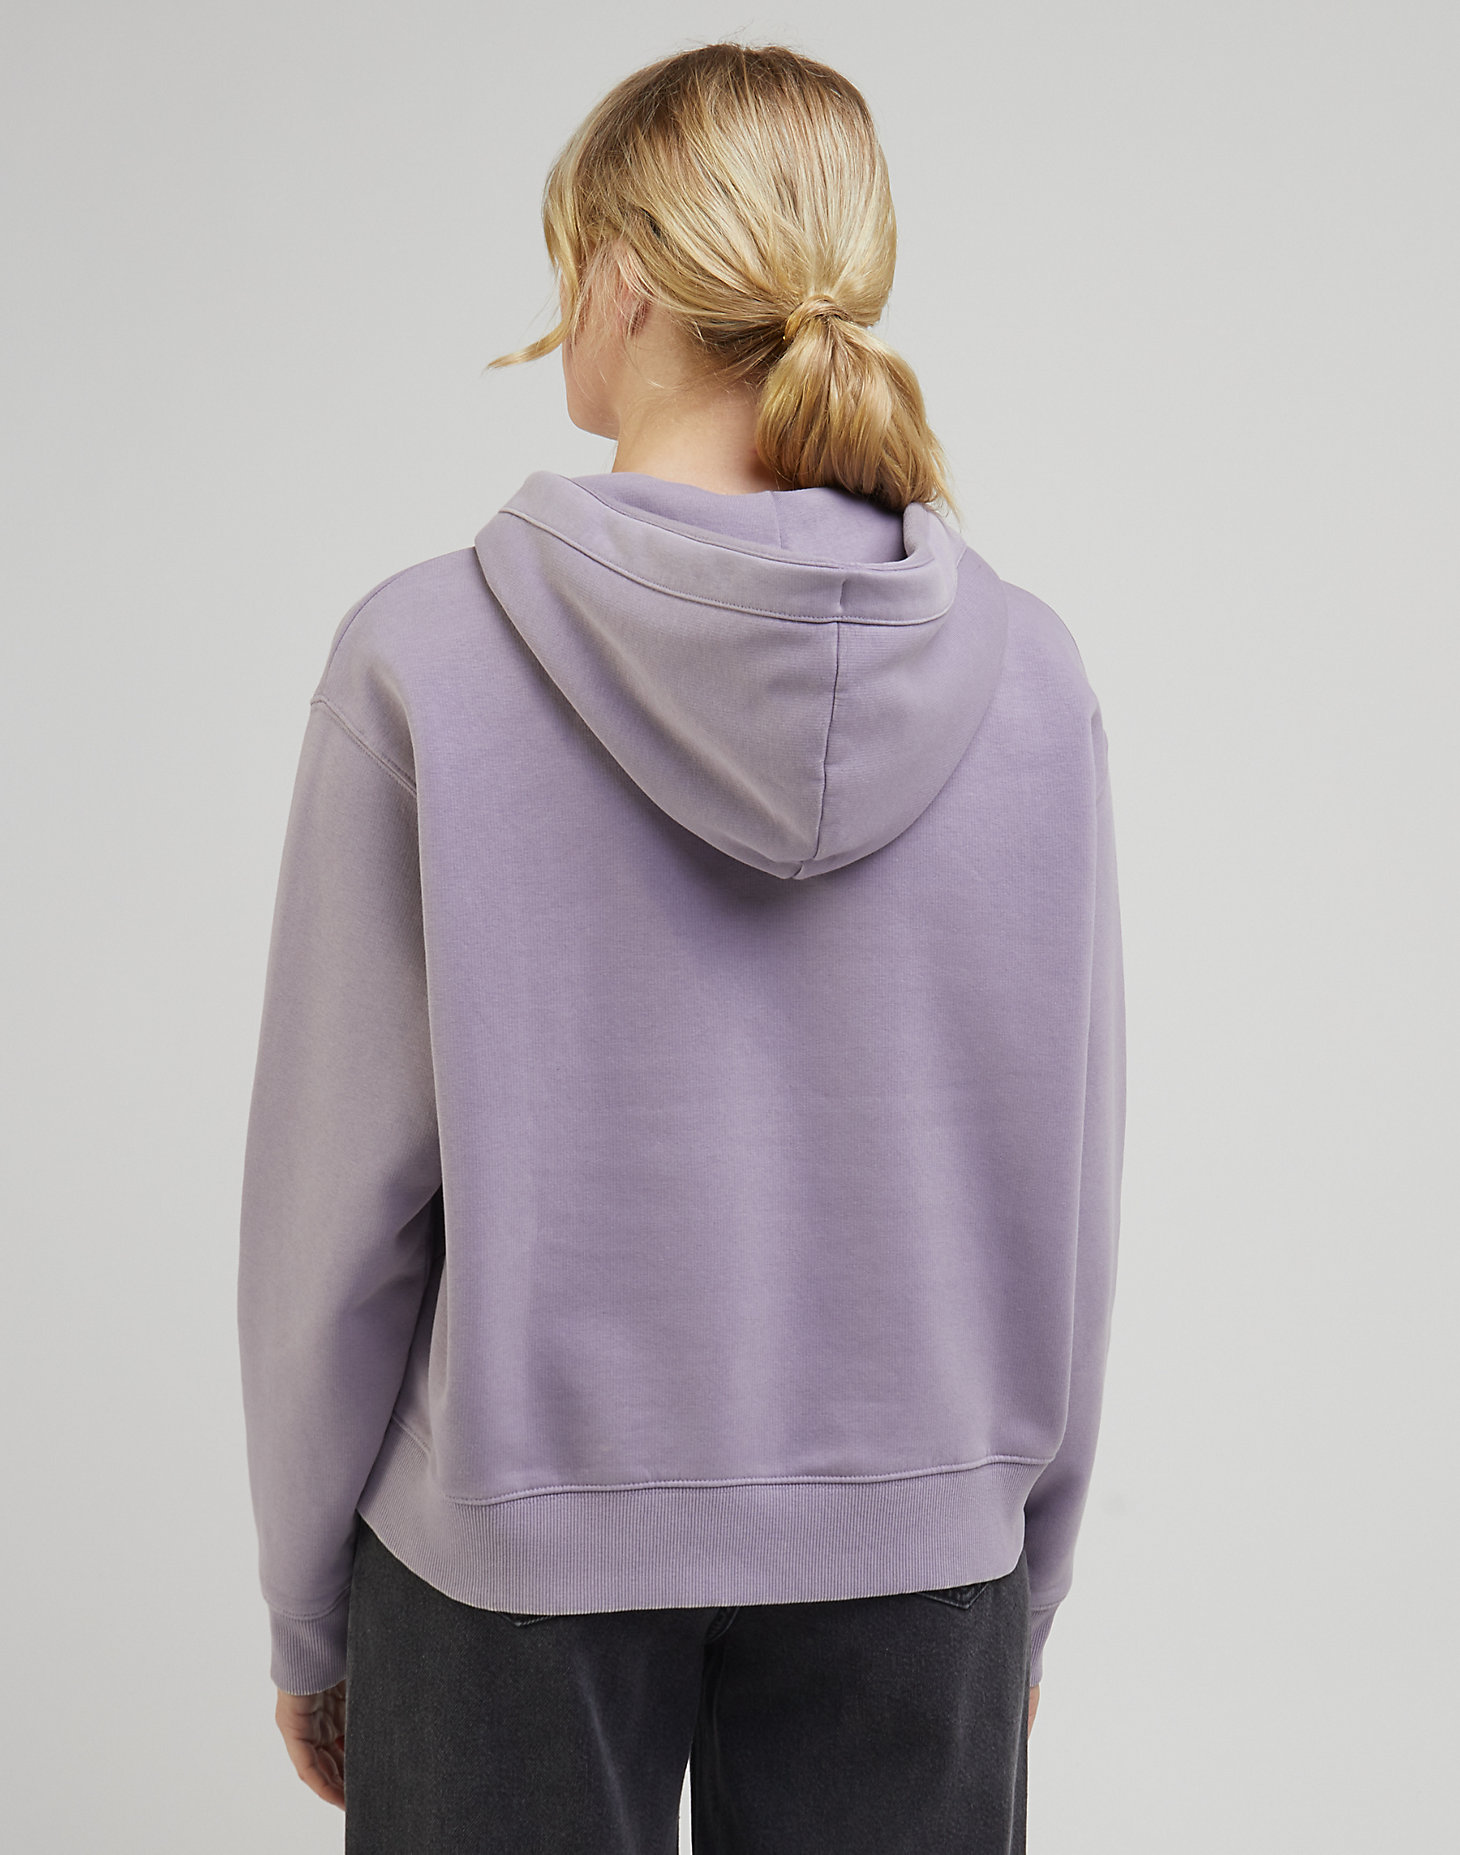 Relaxed Hoodie in Jazzy Purple alternative view 1